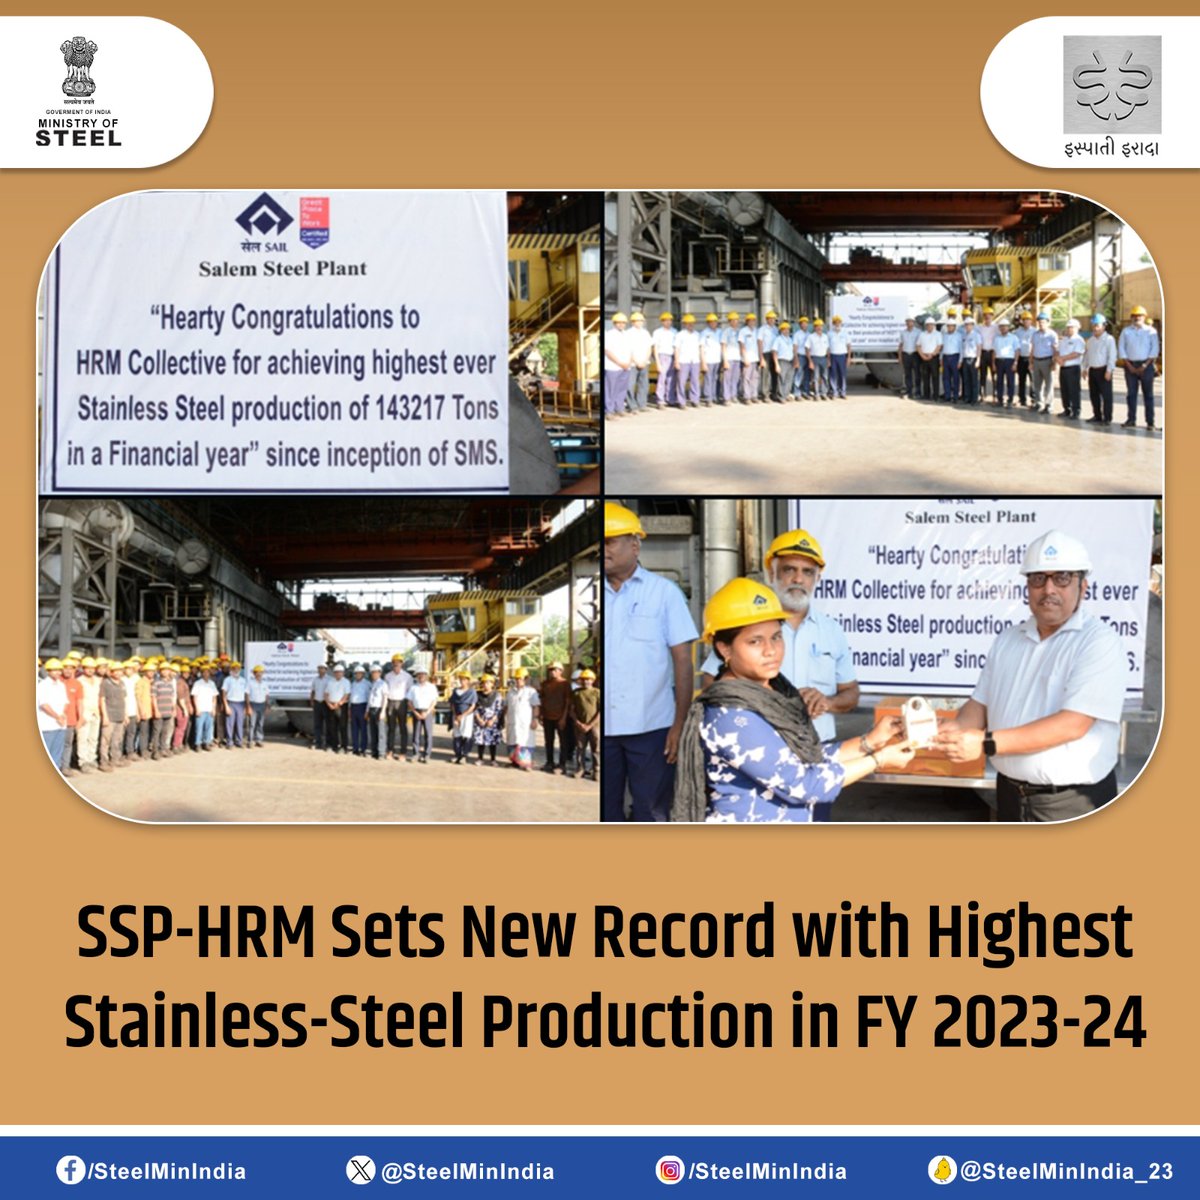 SSP-HRM achieves milestone with Record-Breaking Stainless-Steel Production in FY 2023-24! ED SSP acknowledges the team's dedication and expertise during the visit.👏

#SAIL #SalemSteelPlant #StainlessSteel #ProductionRecord